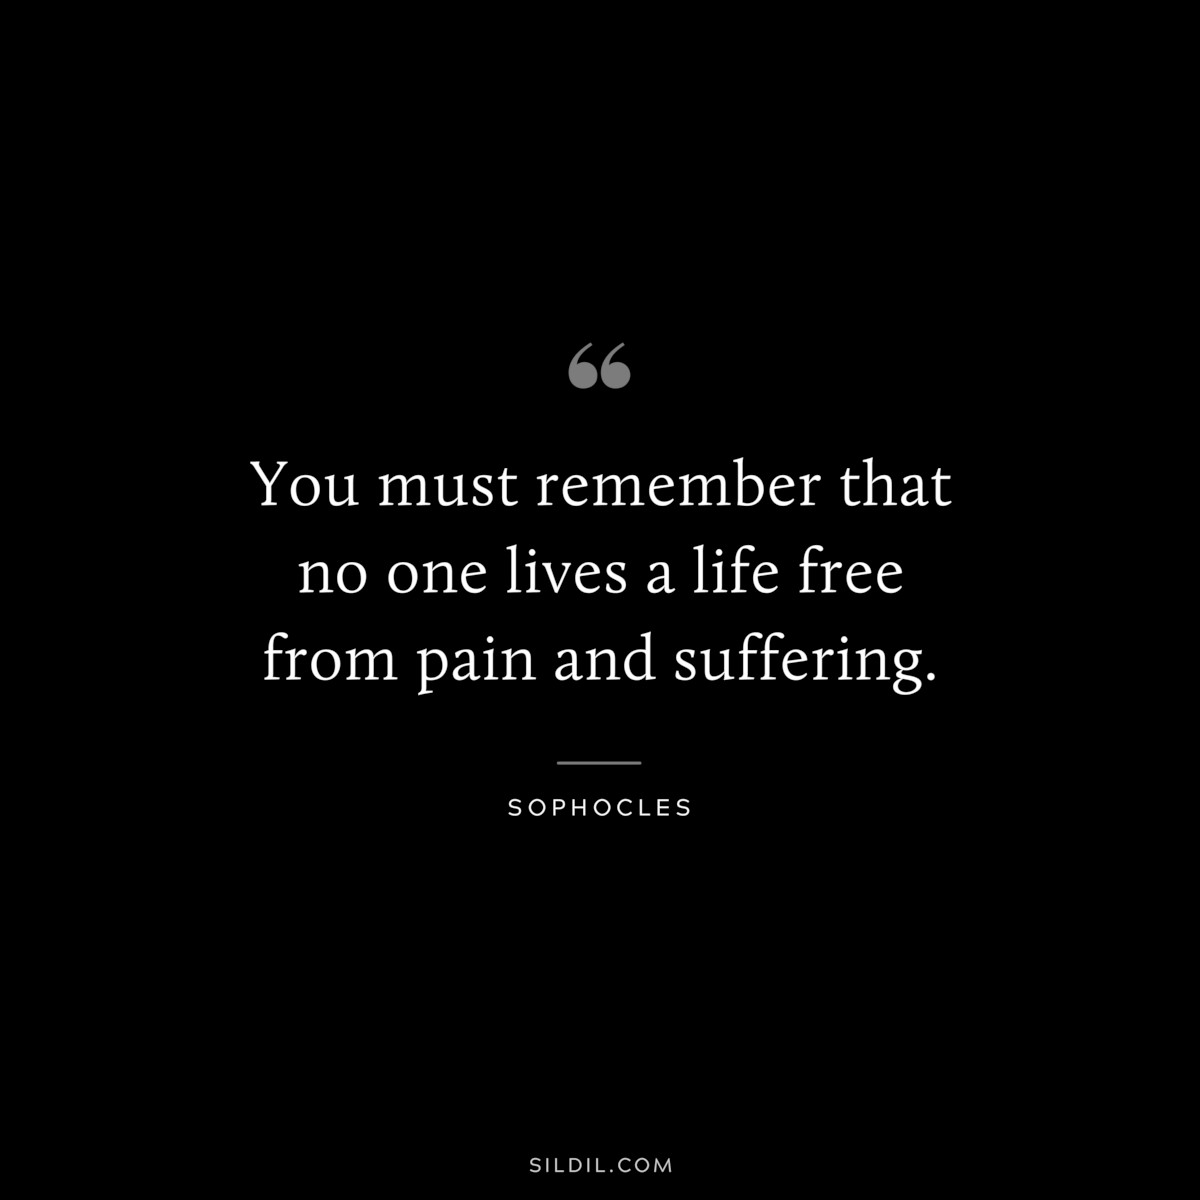 You must remember that no one lives a life free from pain and suffering. ― Sophocles